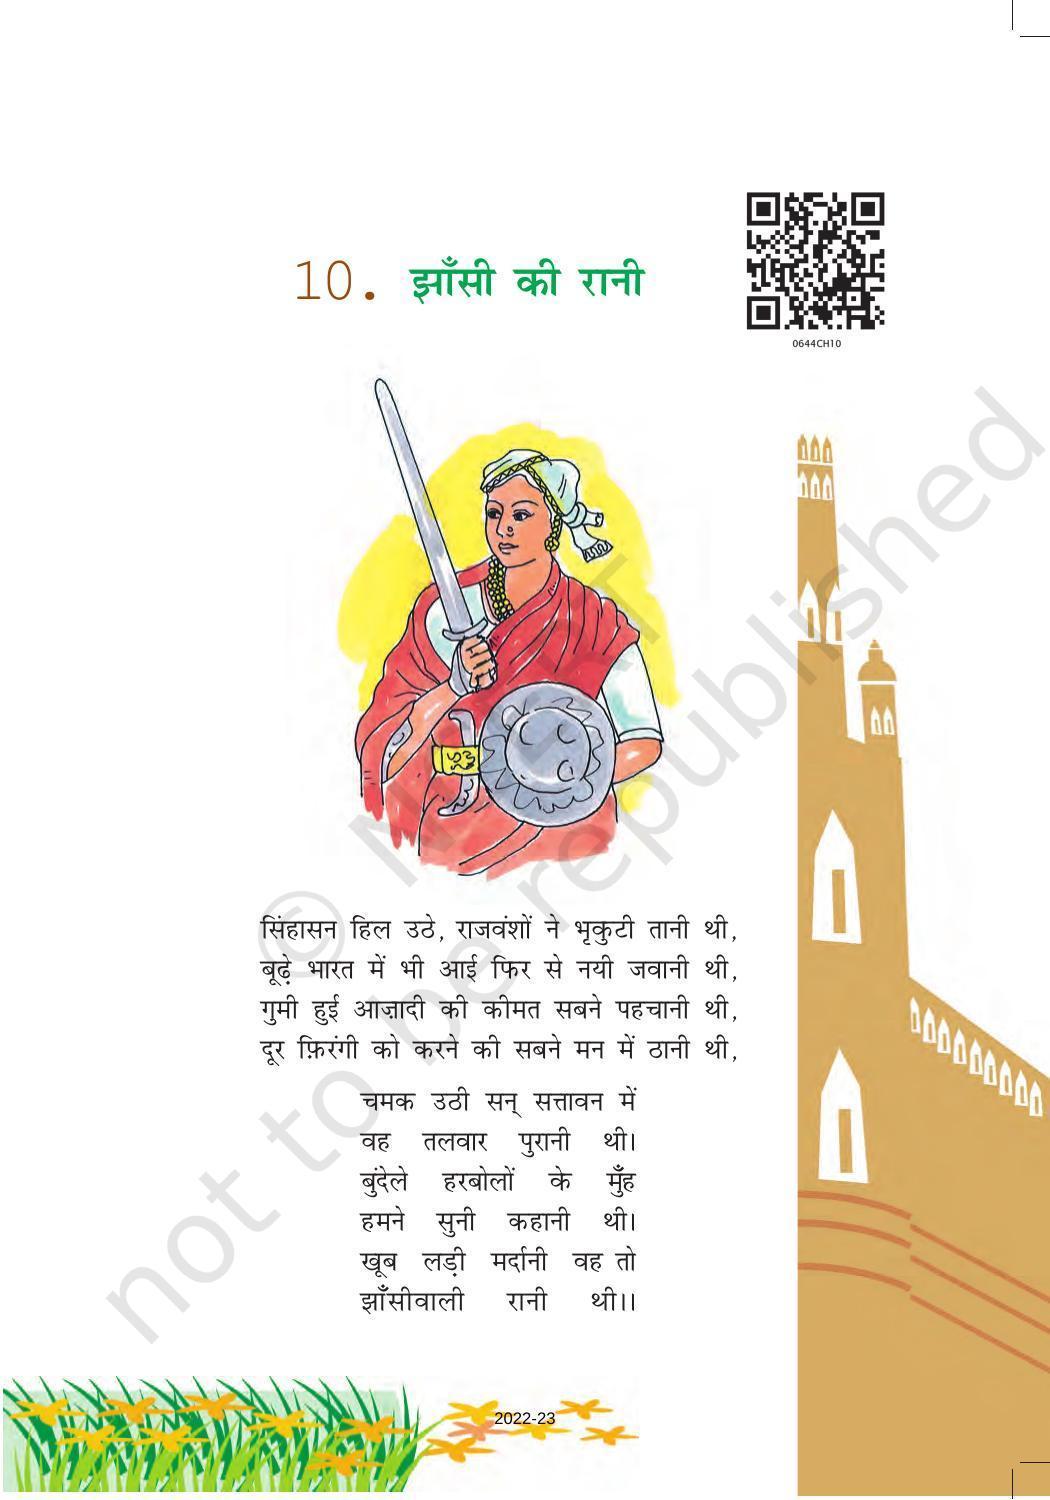 NCERT Book for Class 6 Hindi(Vasant Bhag 1) : Chapter 10-झांसी की रानी - Page 1